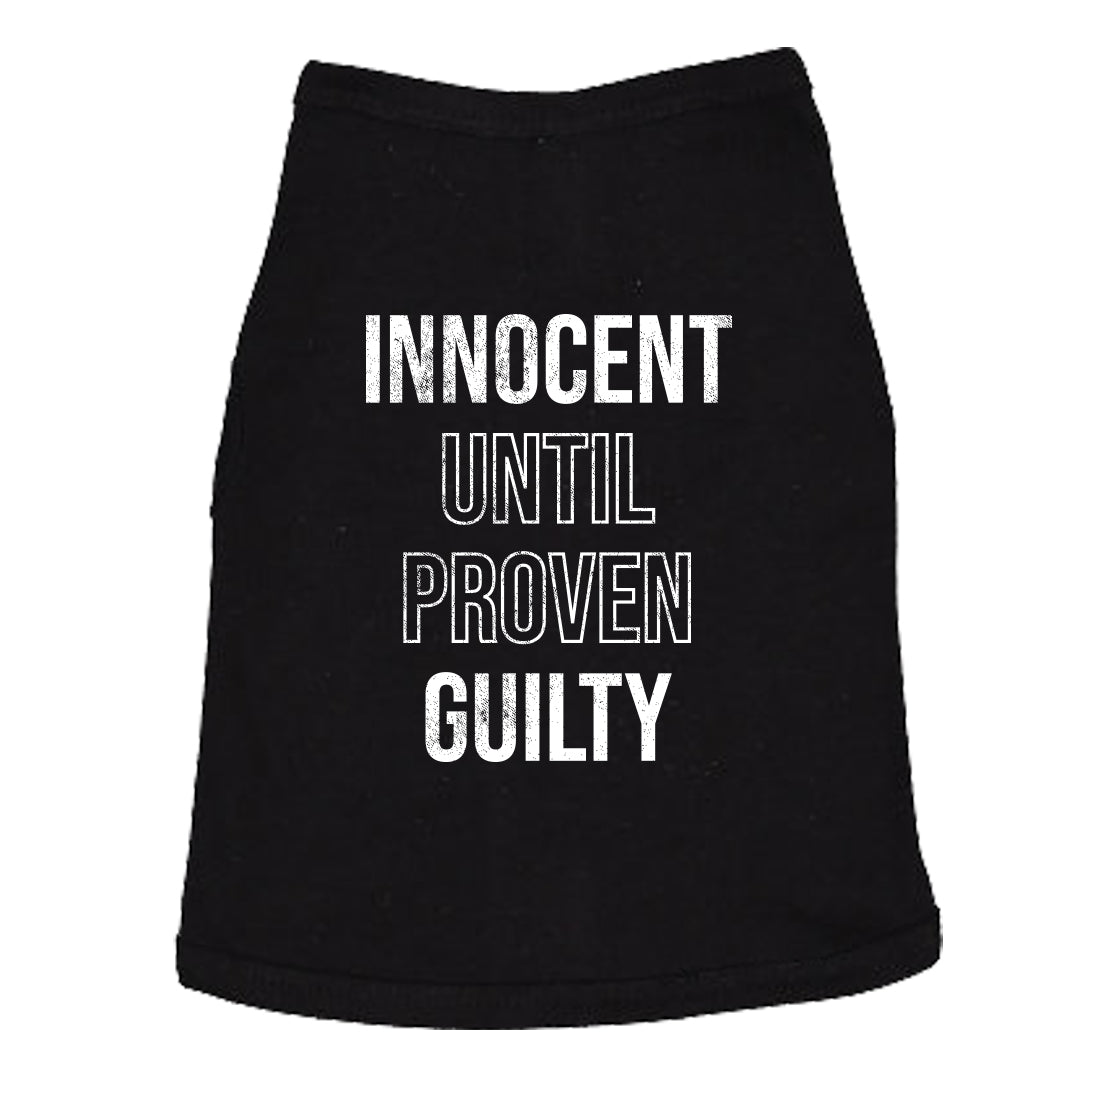 Funny Black - INNOCENT Innocent Until Proven Guilty Dog Shirt Nerdy sarcastic Tee